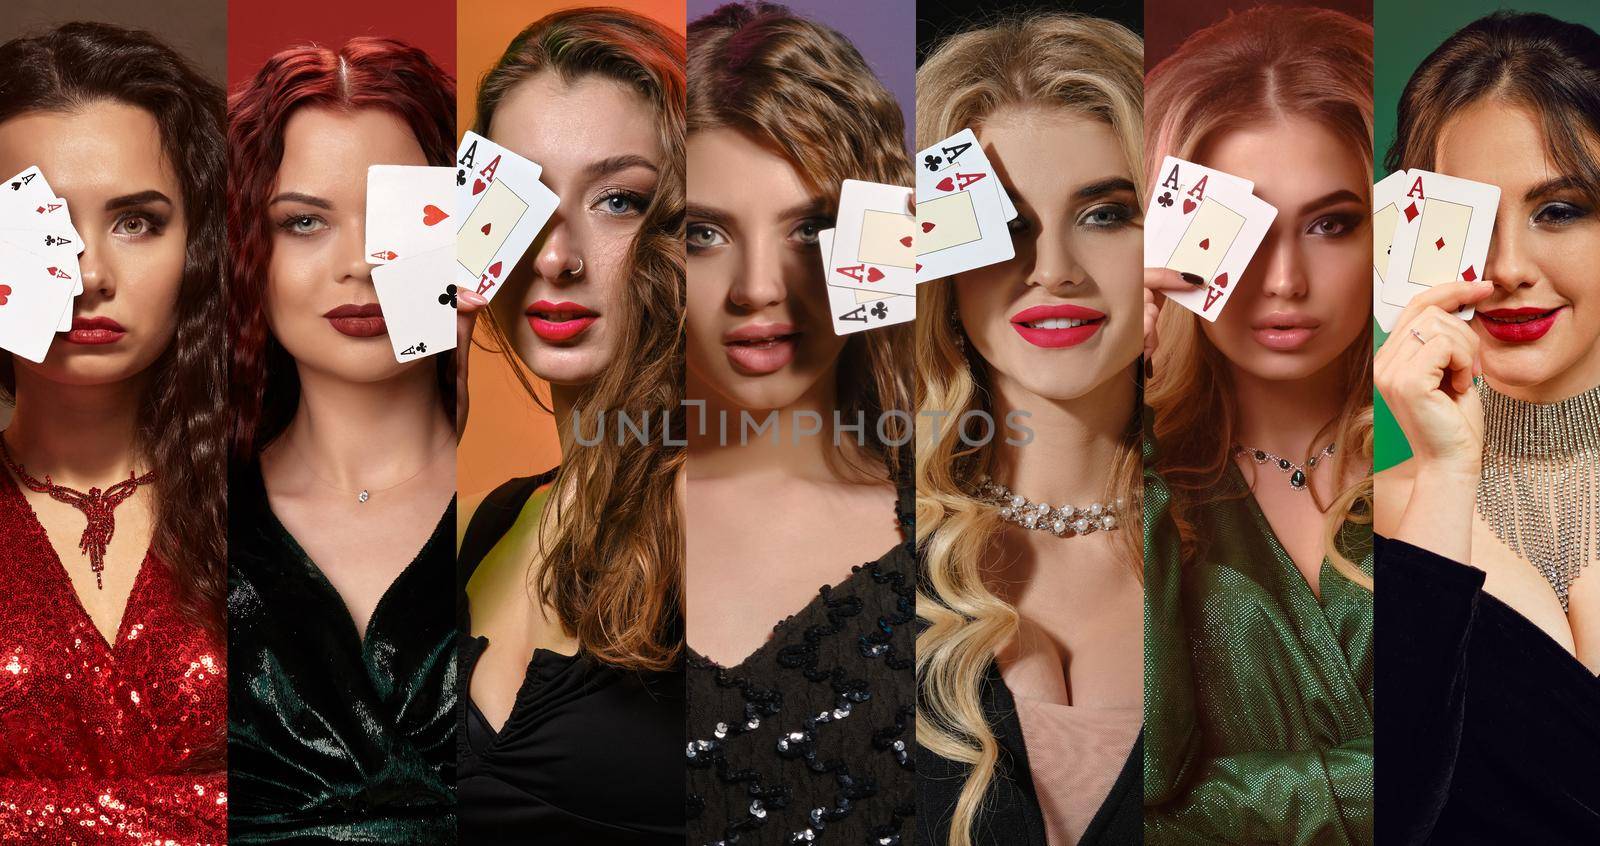 Collage of attractive models with make-up, hairstyles, in stylish dresses and jewelry. They covered one eye with two playing cards, smiling, posing on colorful backgrounds. Poker, casino. Close-up